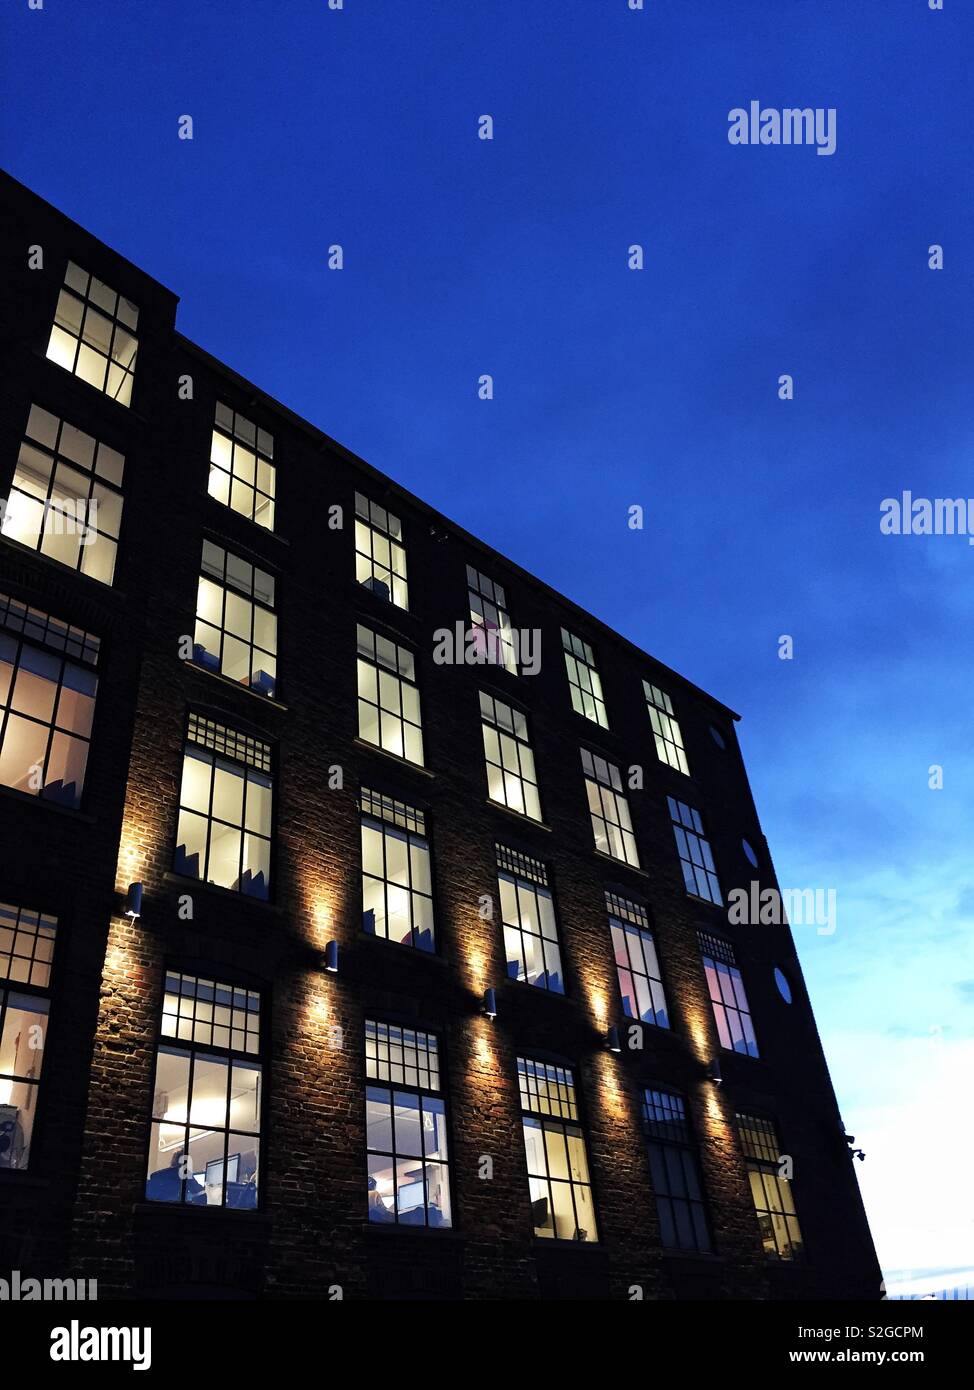 The exterior of a modern office block at night with the glow of window light in the rows of windows lighting up the interior rooms Stock Photo